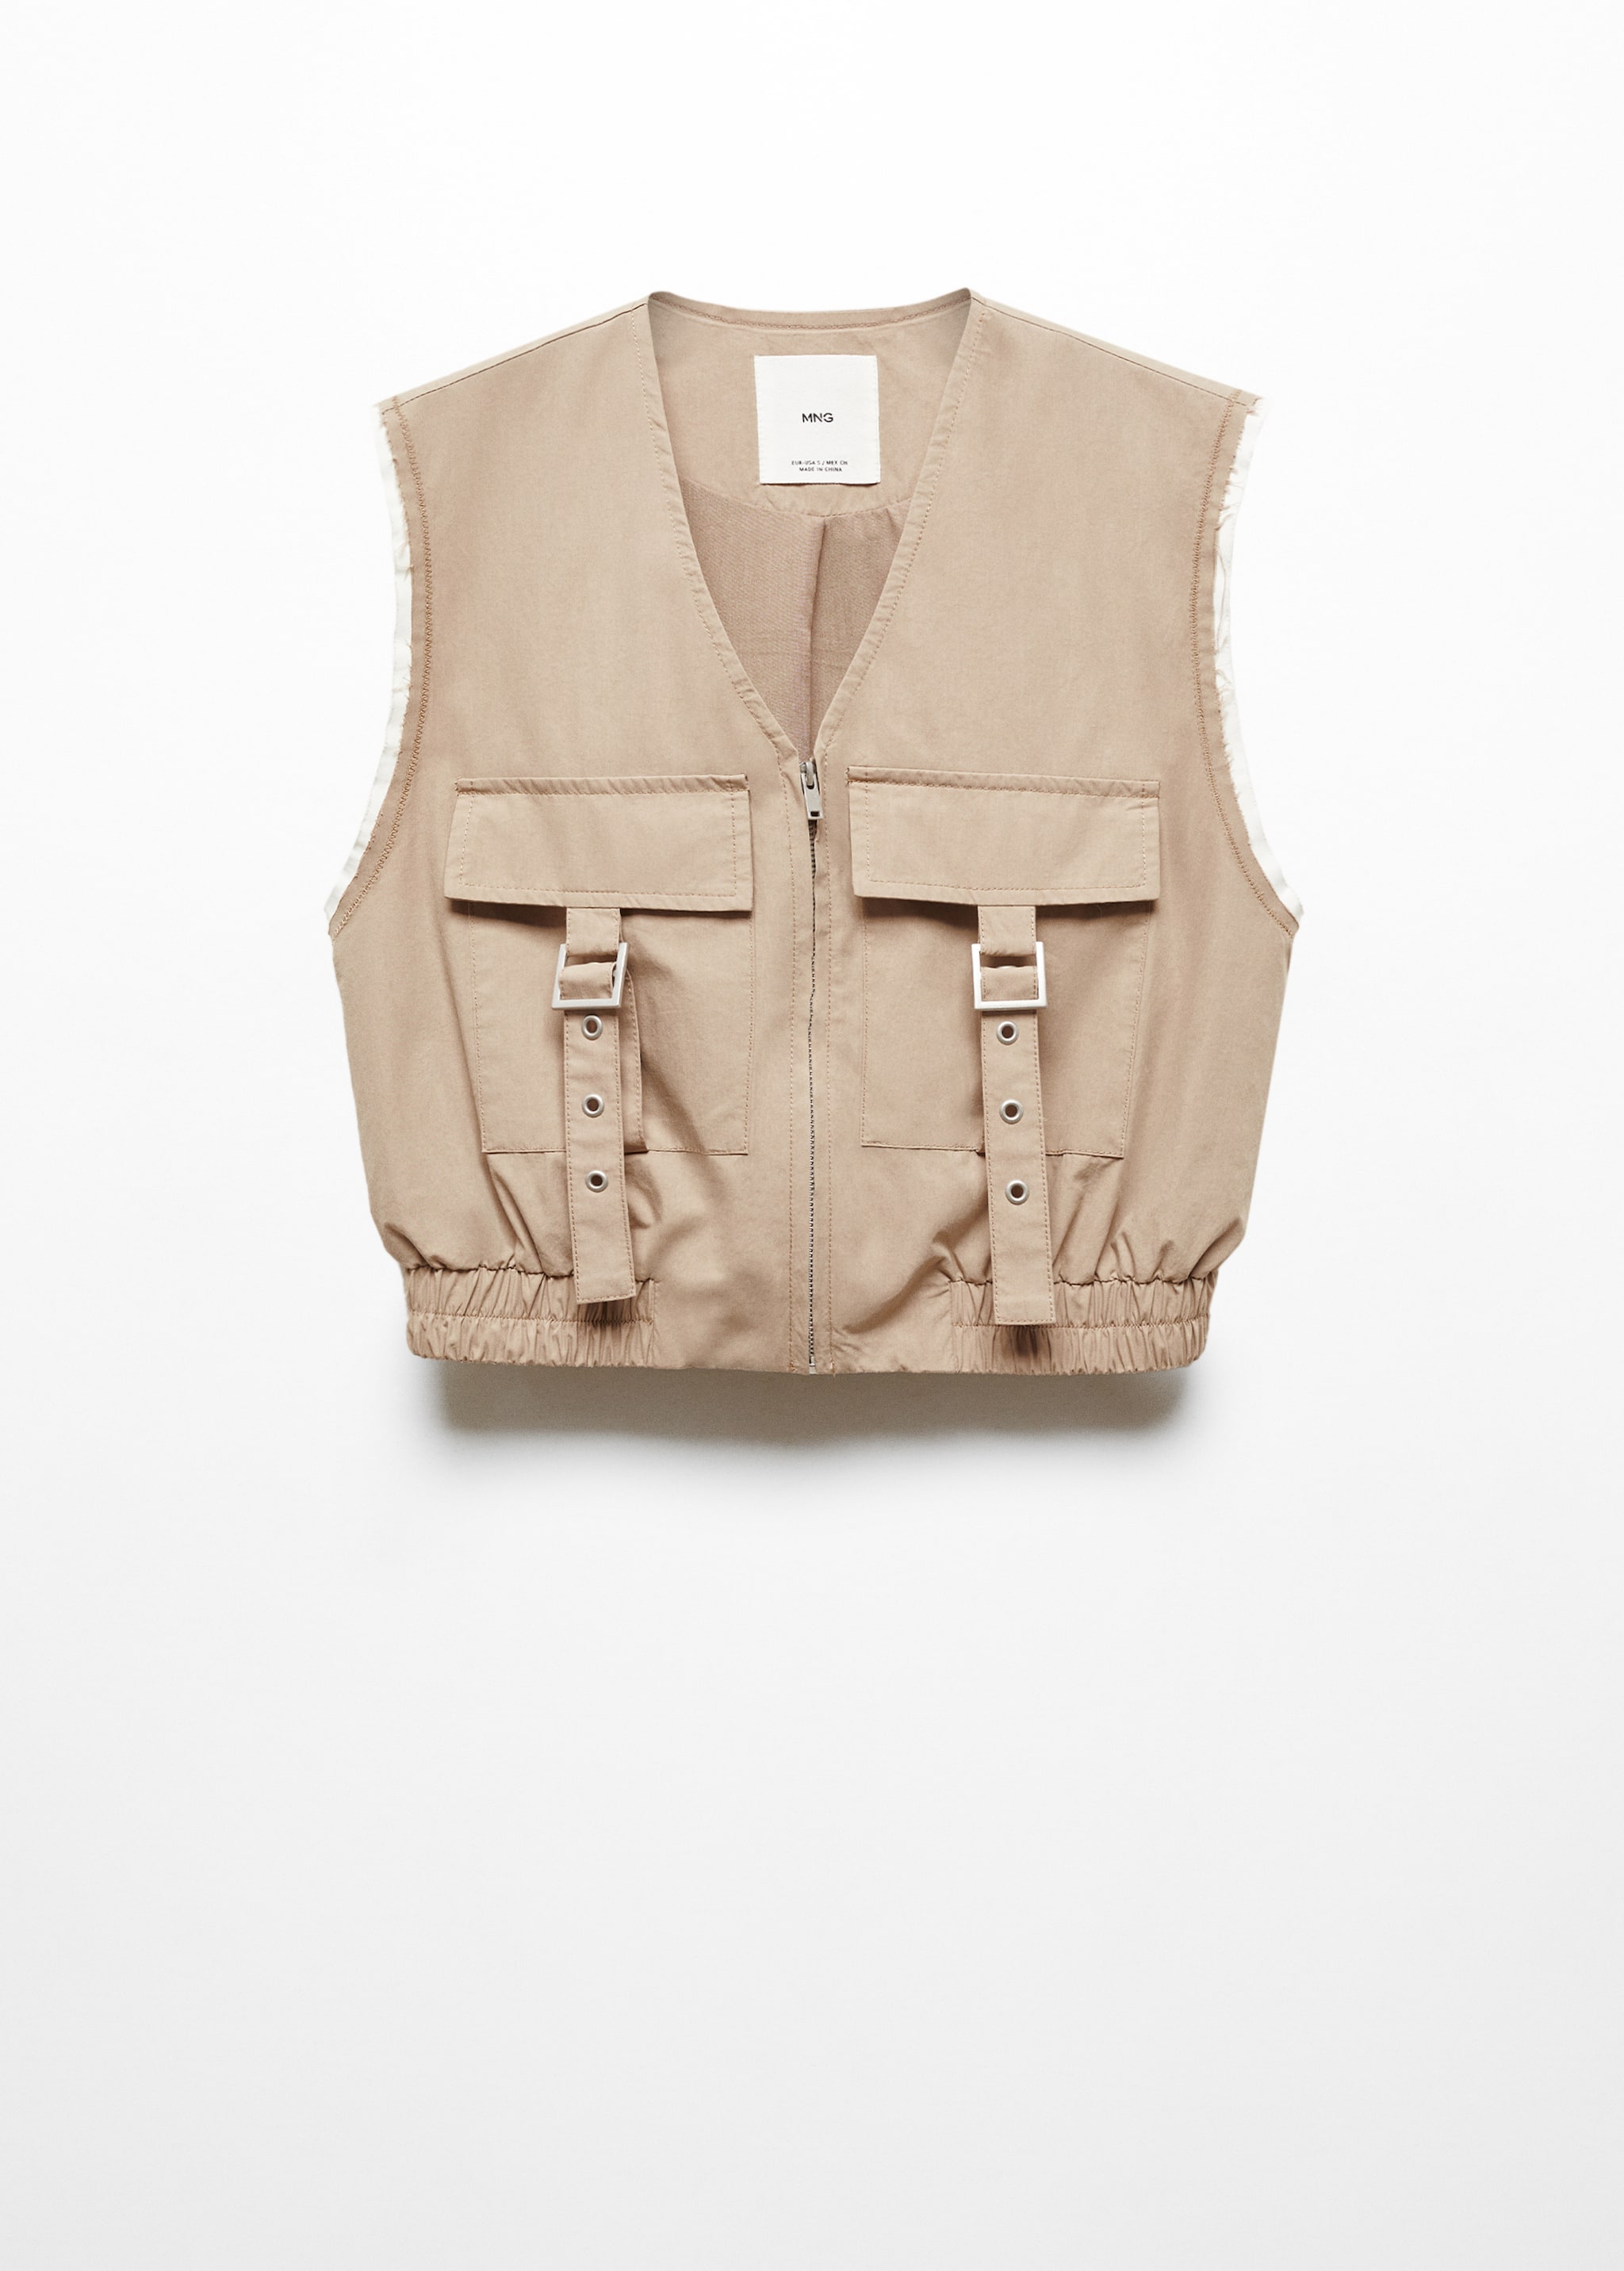 Vest with cargo pockets - Article without model